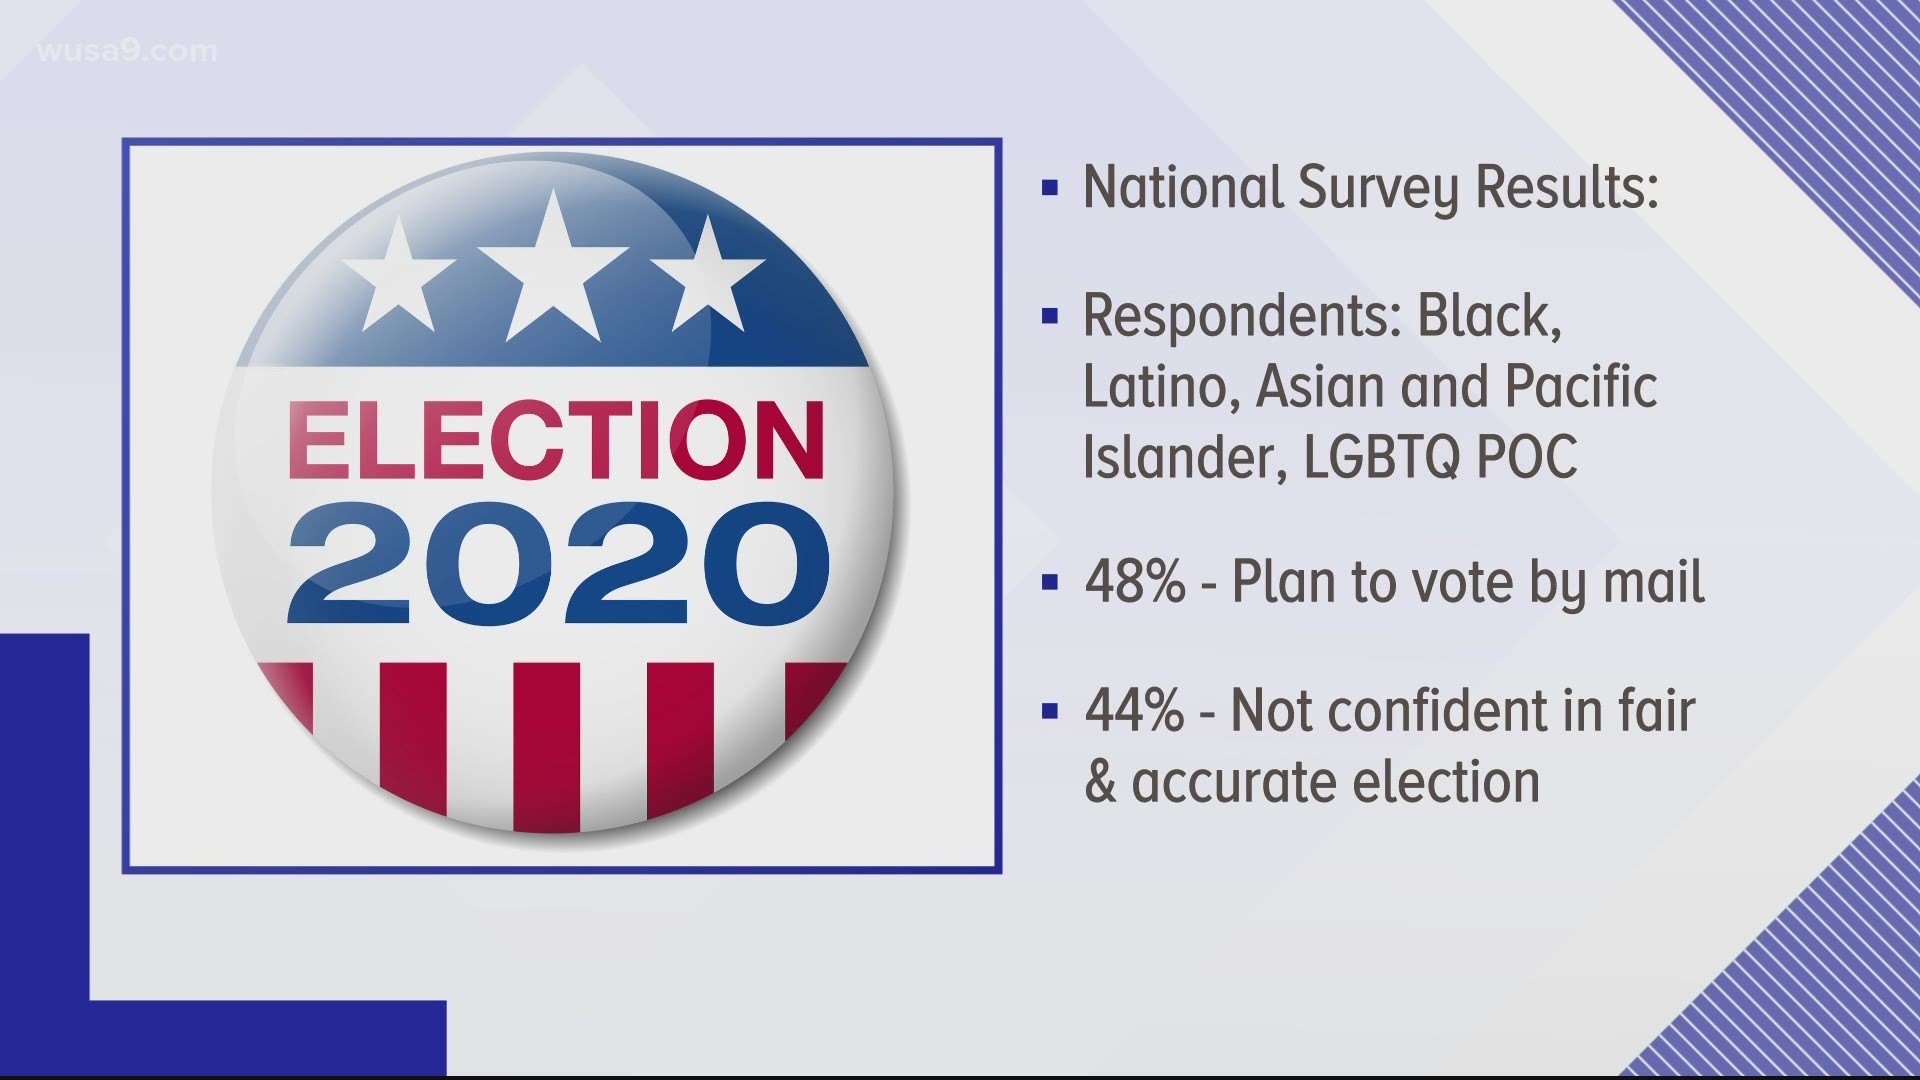 The Human Rights Campaign Foundation also found that, despite the coronavirus' spread, only 48% of minorities who responded to its survey plan to vote by mail.